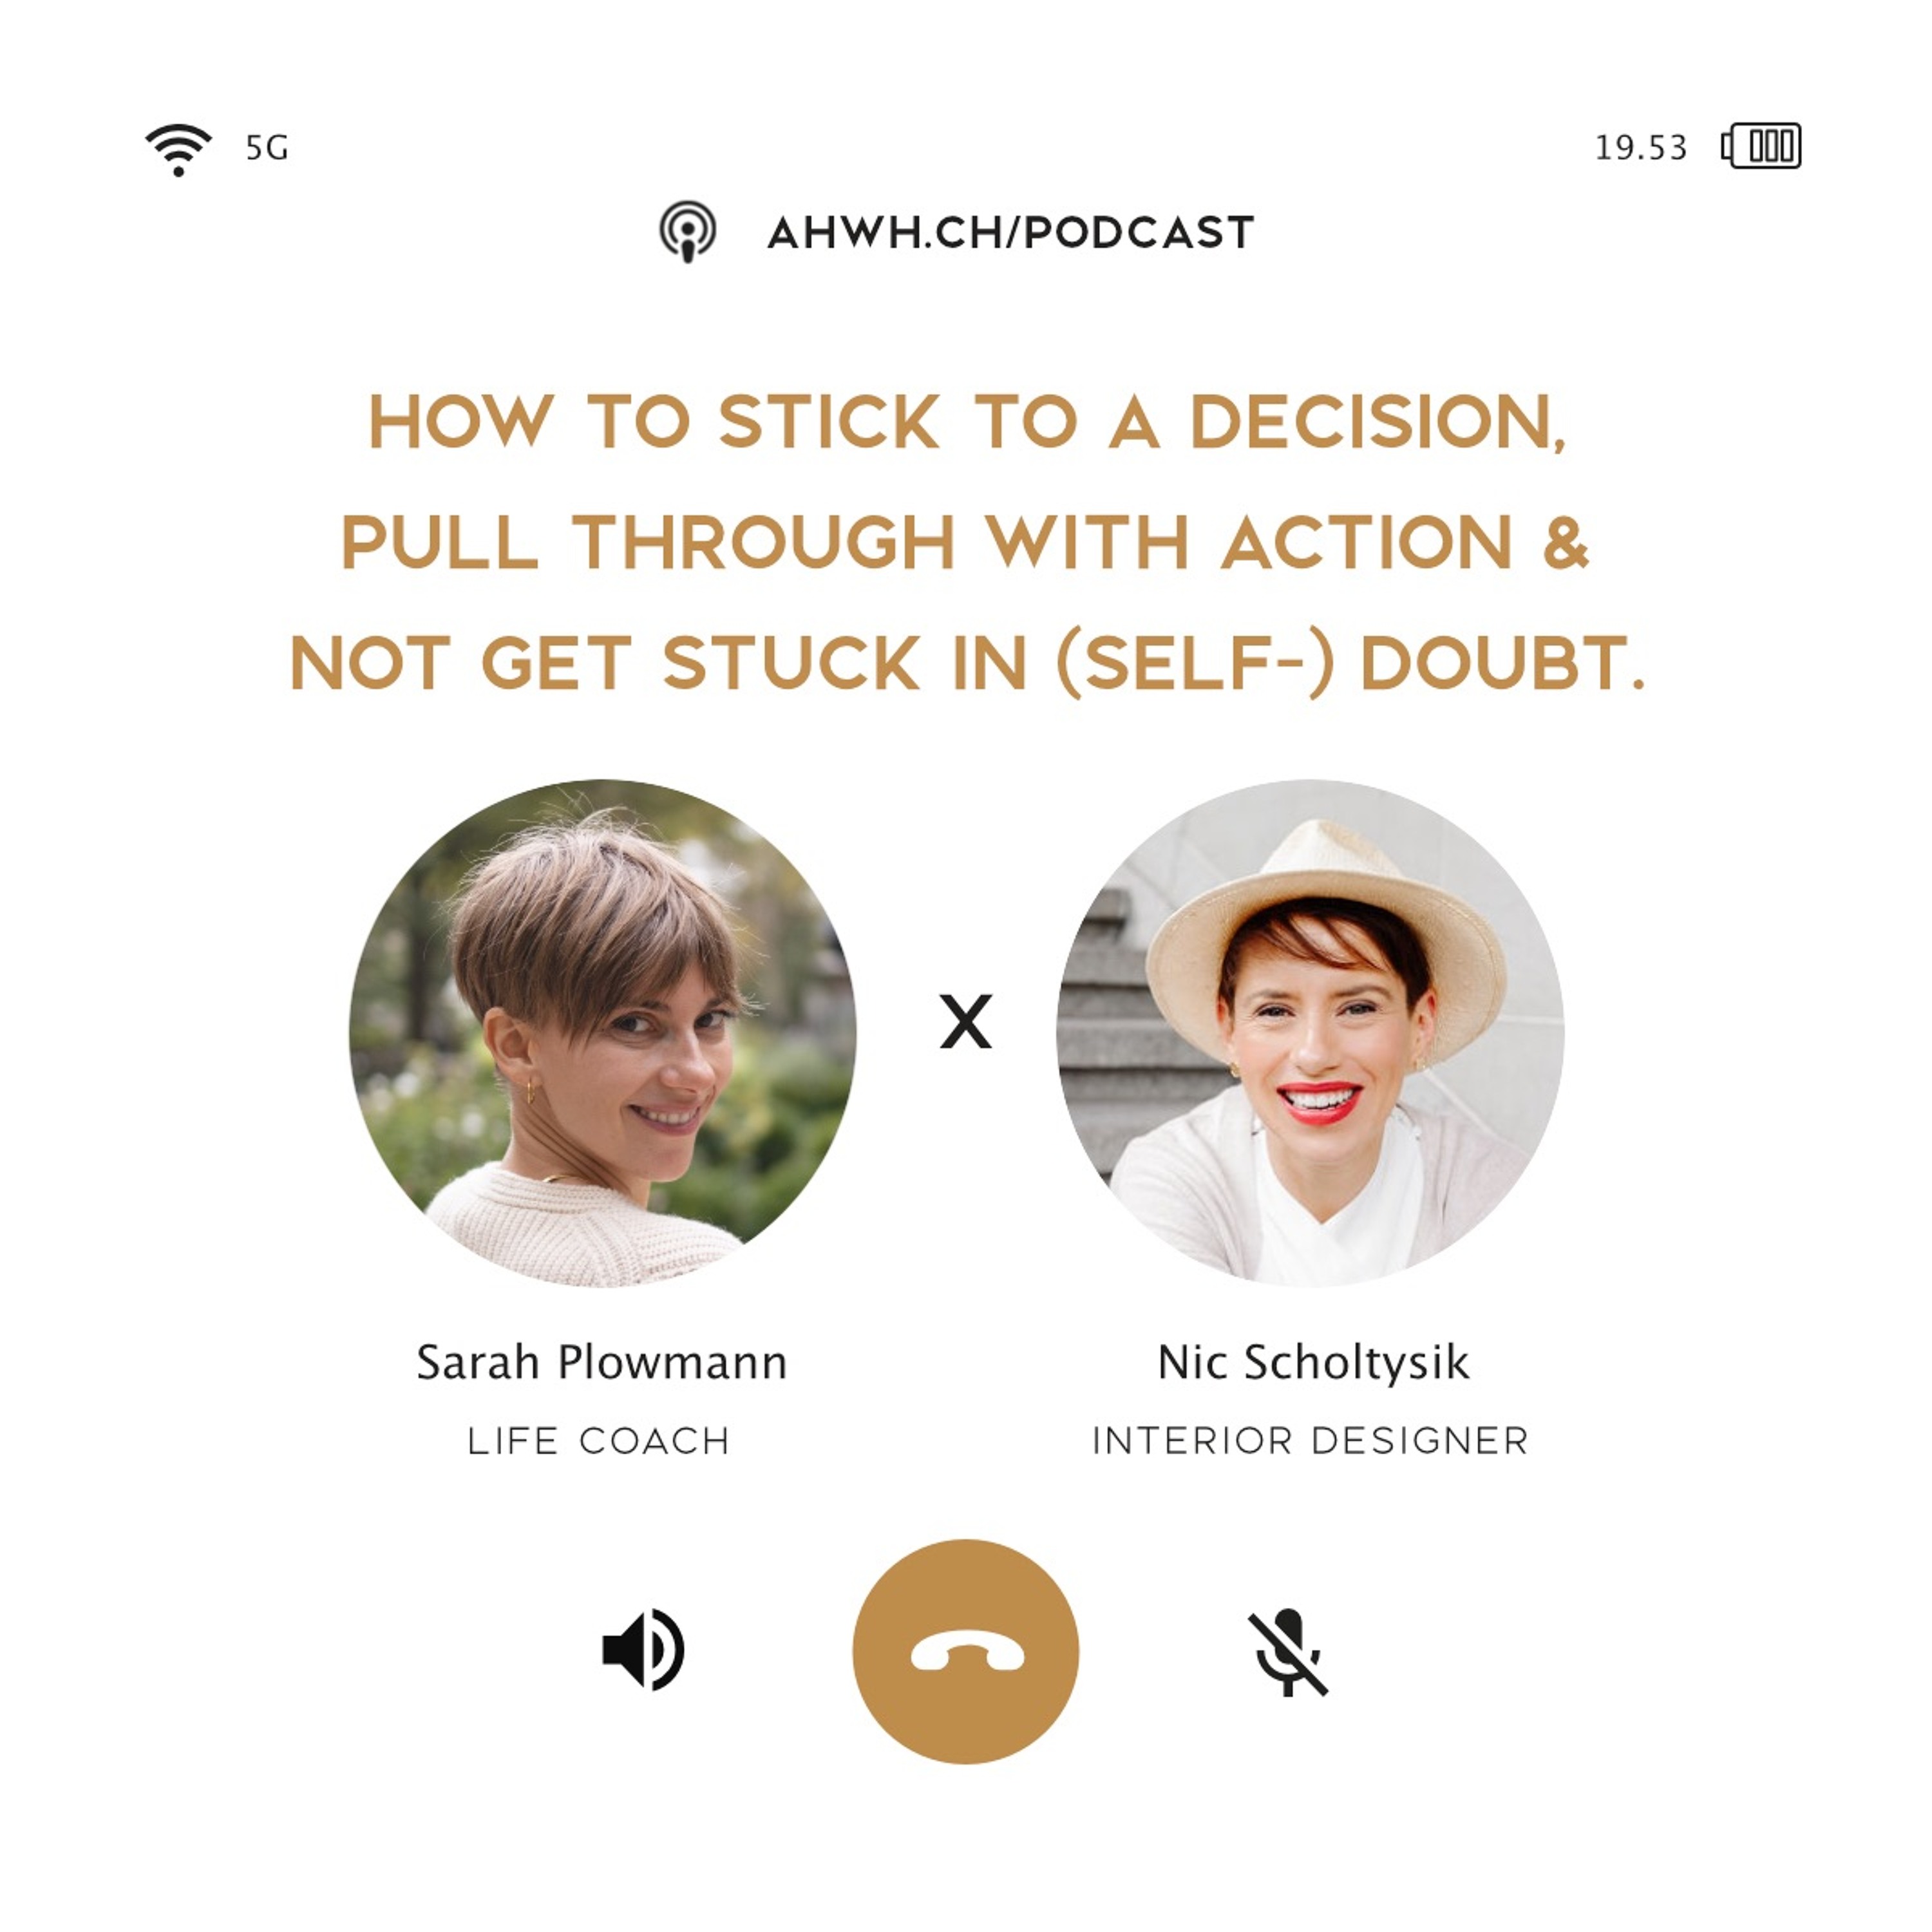 How stick to a decision, follow through with action & not get stuck in (self-)doubt